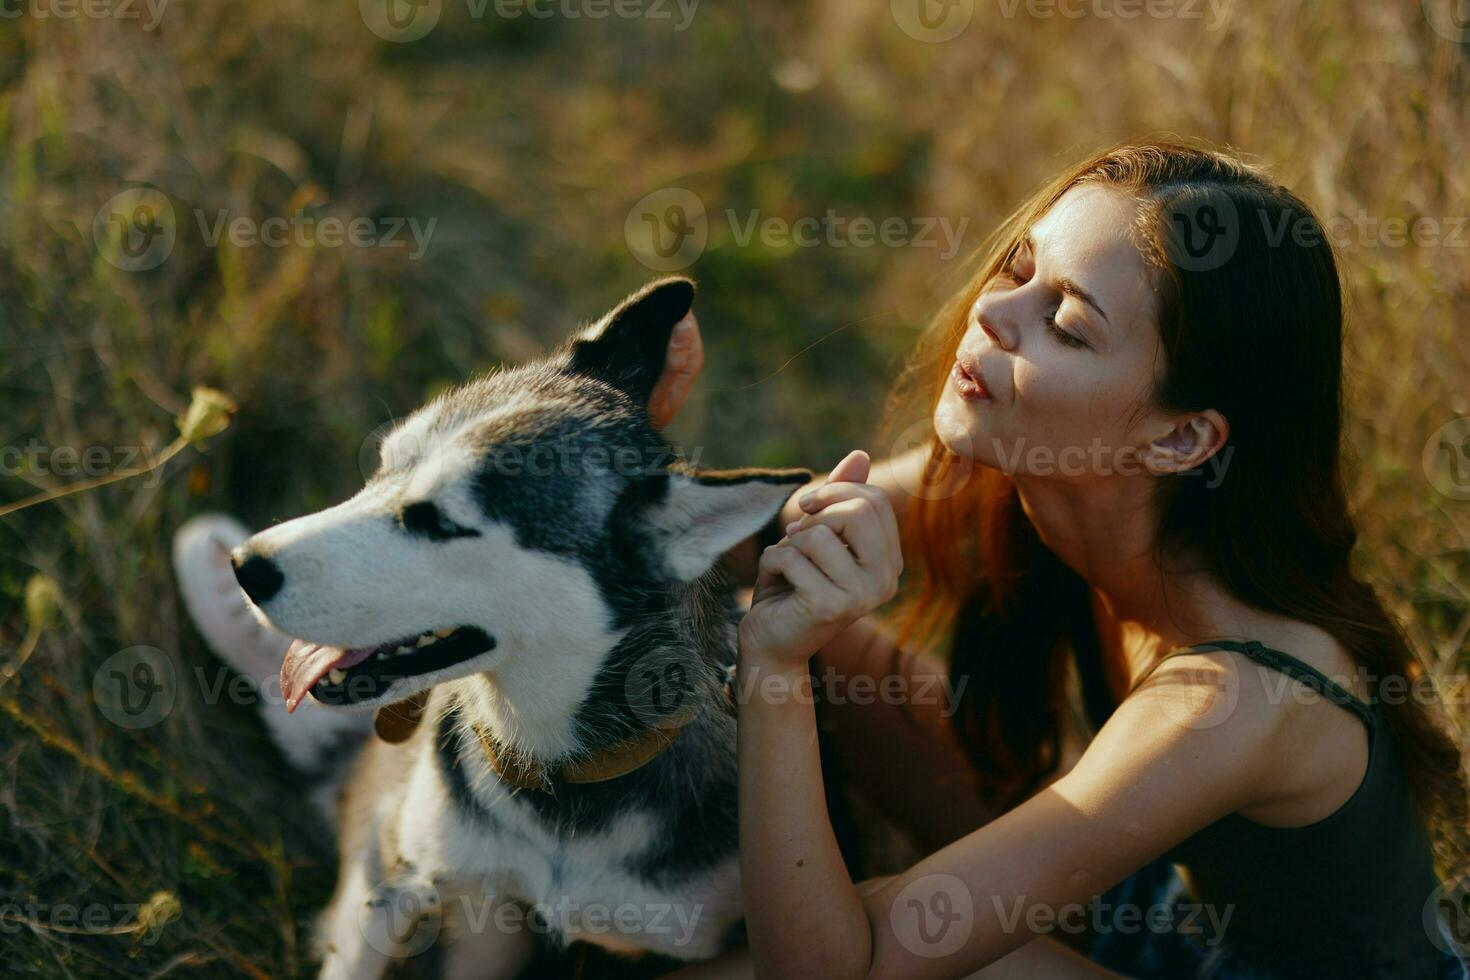 Woman sitting in field with dachshund dog smiling while spending time outdoors with dog friend photo